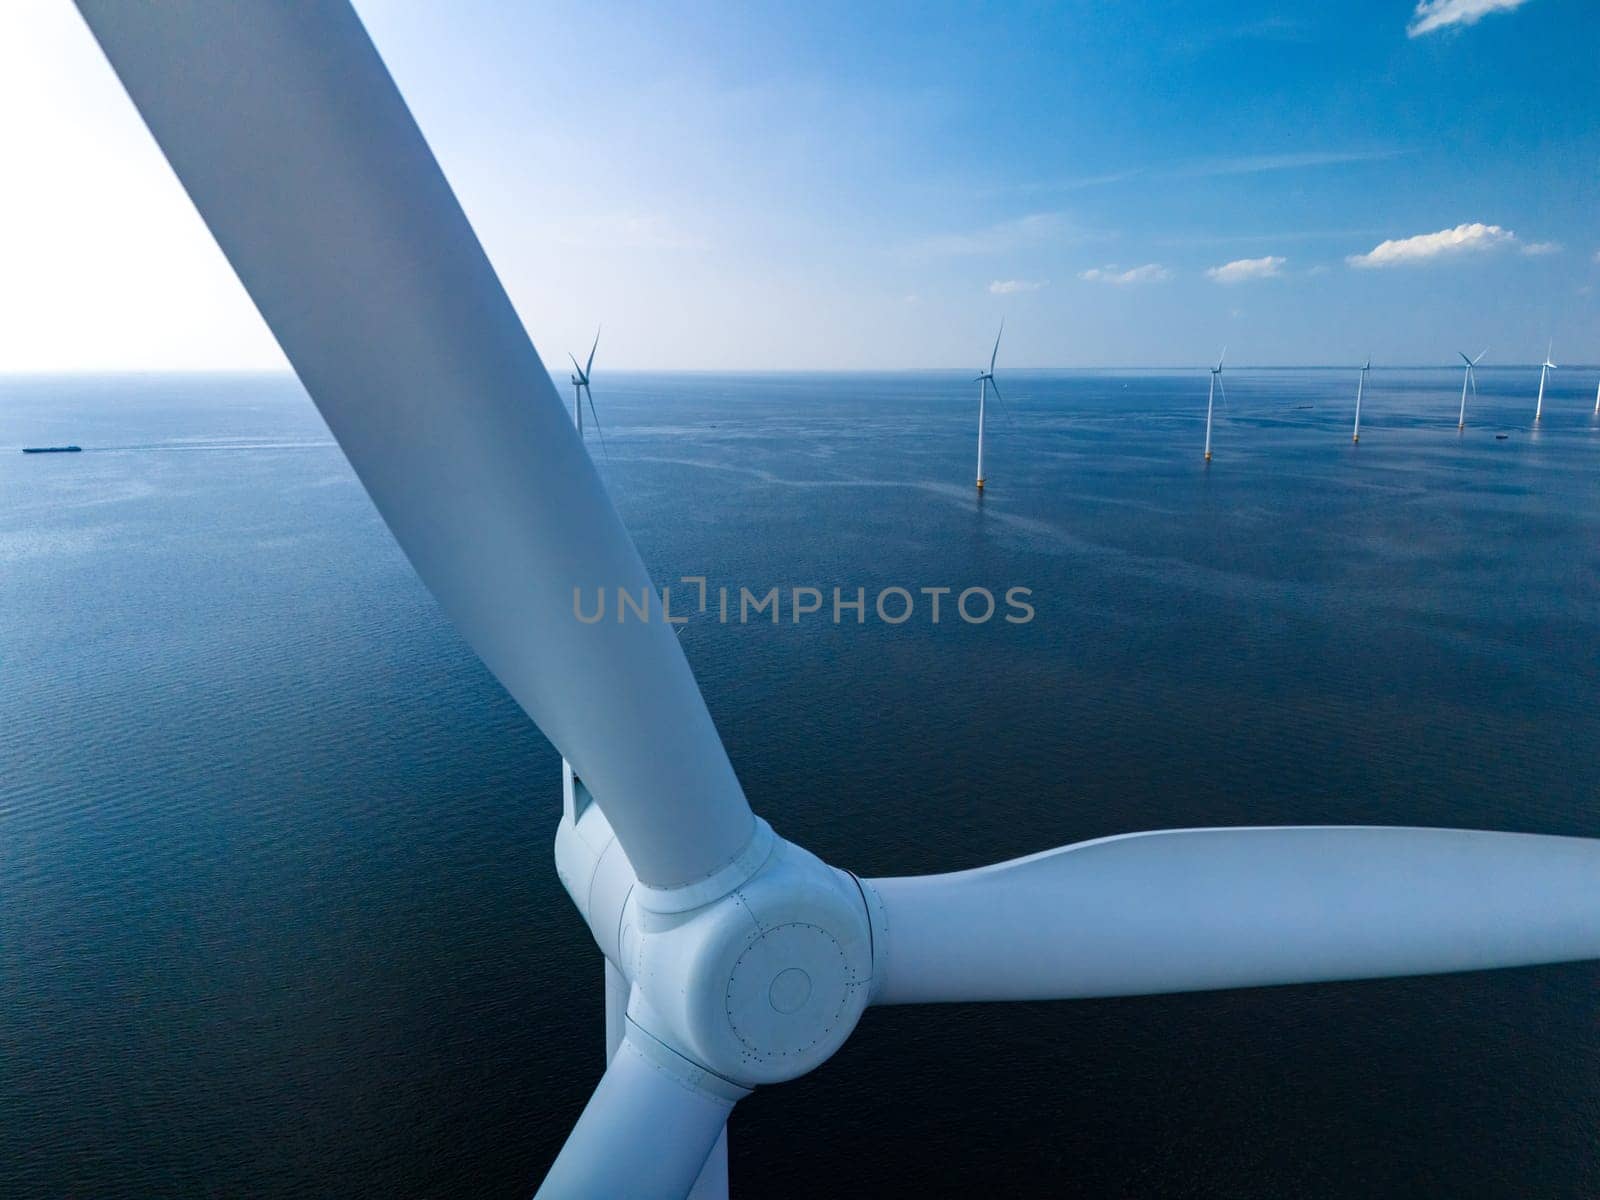 A breathtaking aerial view of a wind farm in the ocean, showcasing rows of towering windmill turbines generating renewable energy in the Netherlands Flevoland by fokkebok